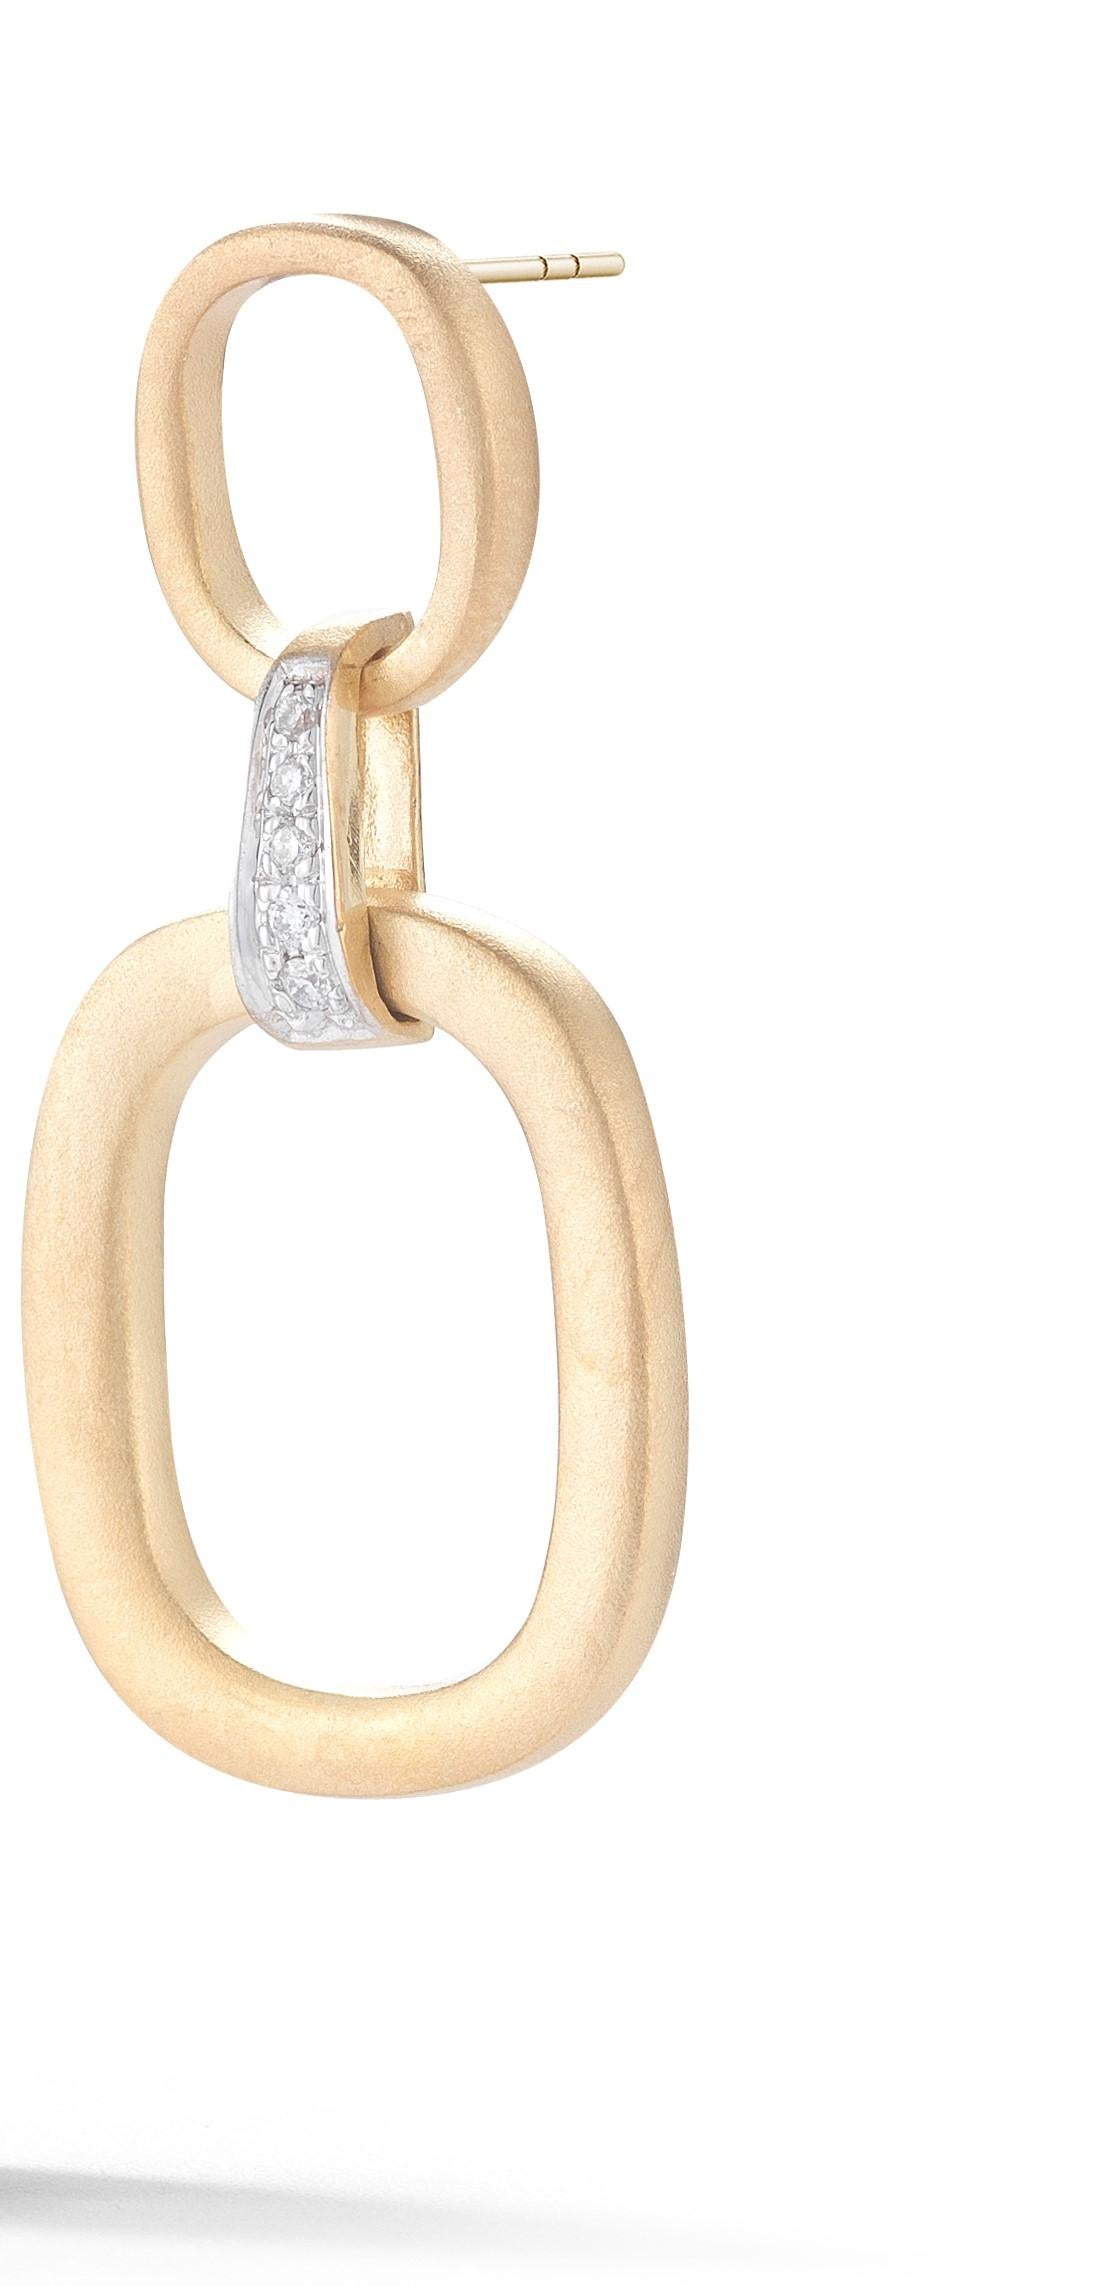 14 Karat Yellow Gold Hand-Crafted Satin Finish Small-Large Diamond Linked Open Square Dangling Earrings, Set with 0.10 Carat Diamonds on a Post-with-Friction Back Finding.
